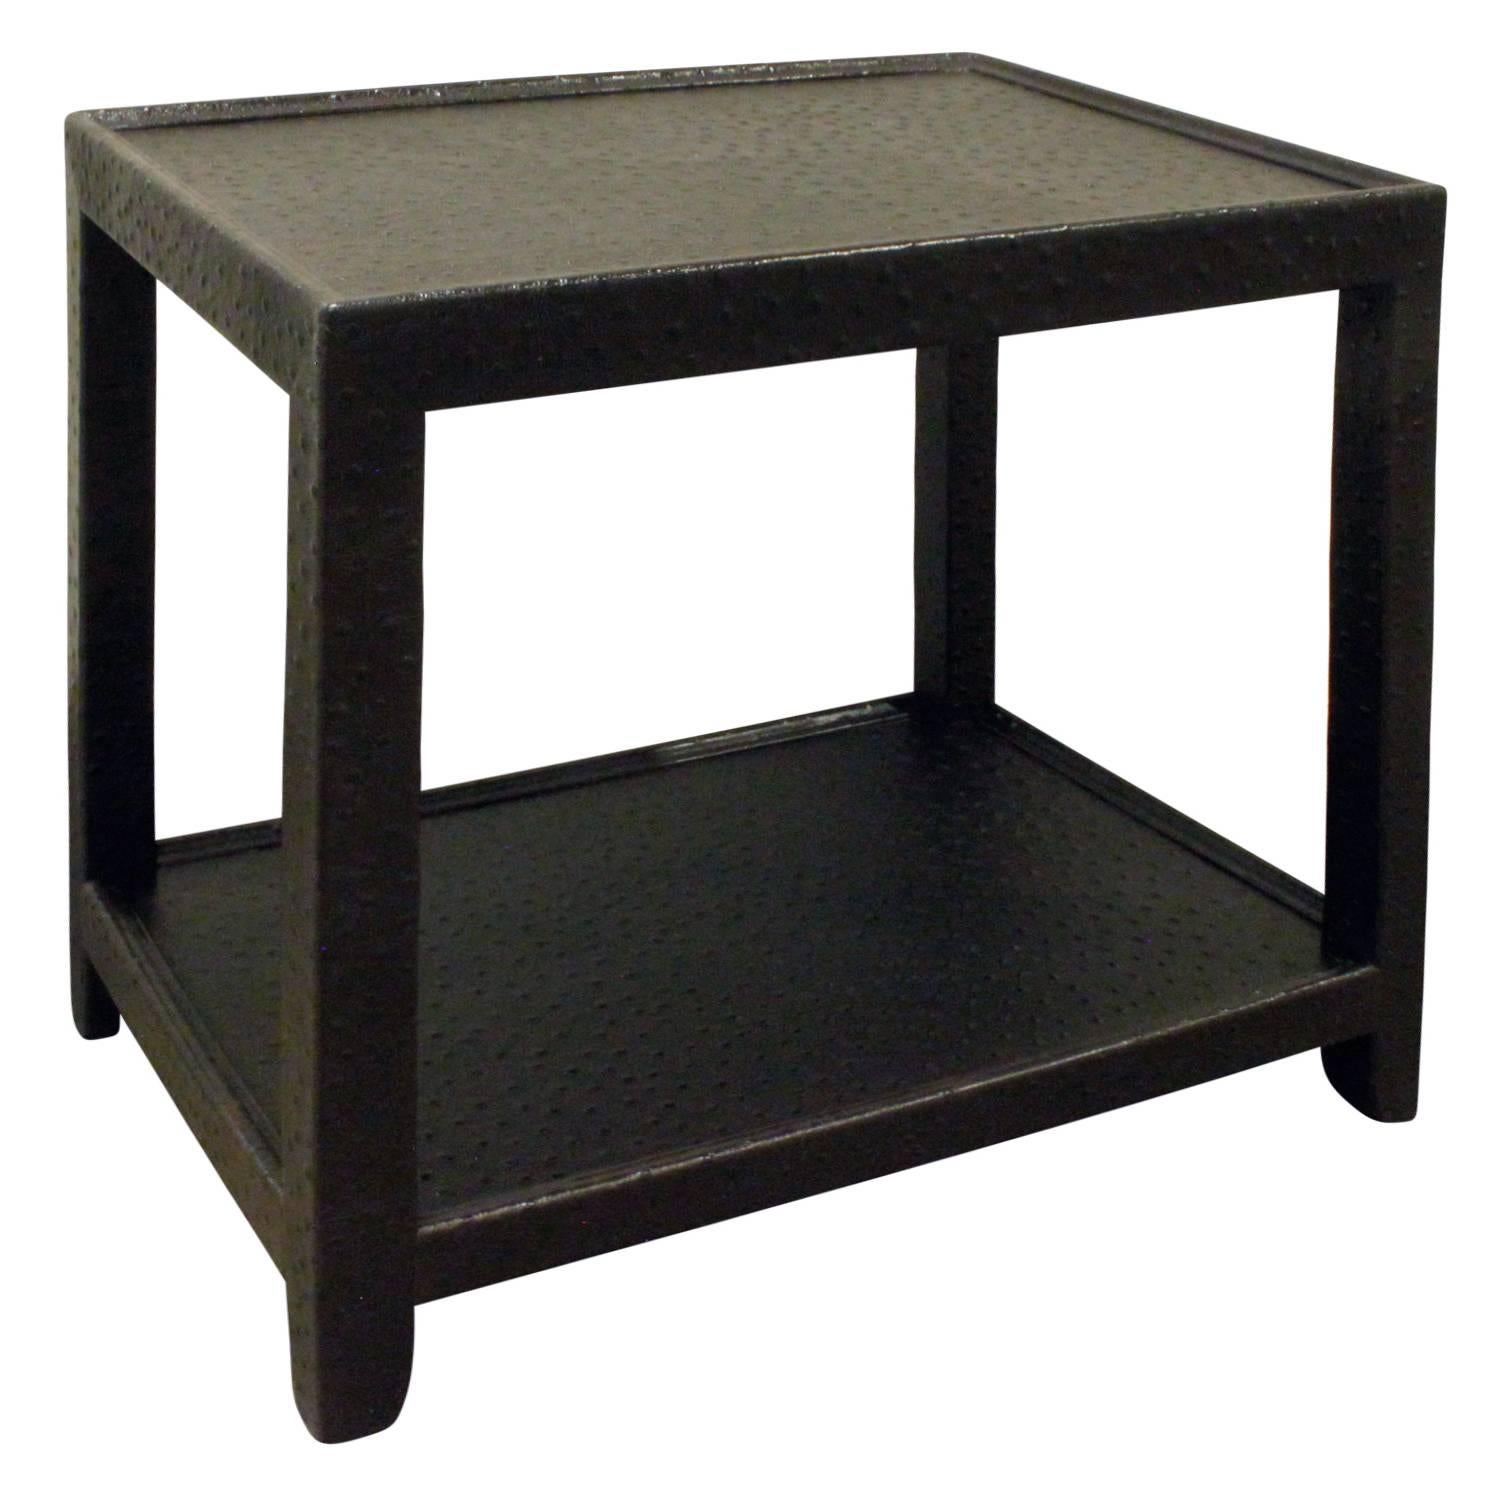 Telephone style side table in black ostrich by Karl Springer, American, 1970s. This table is impeccably made and very chic.